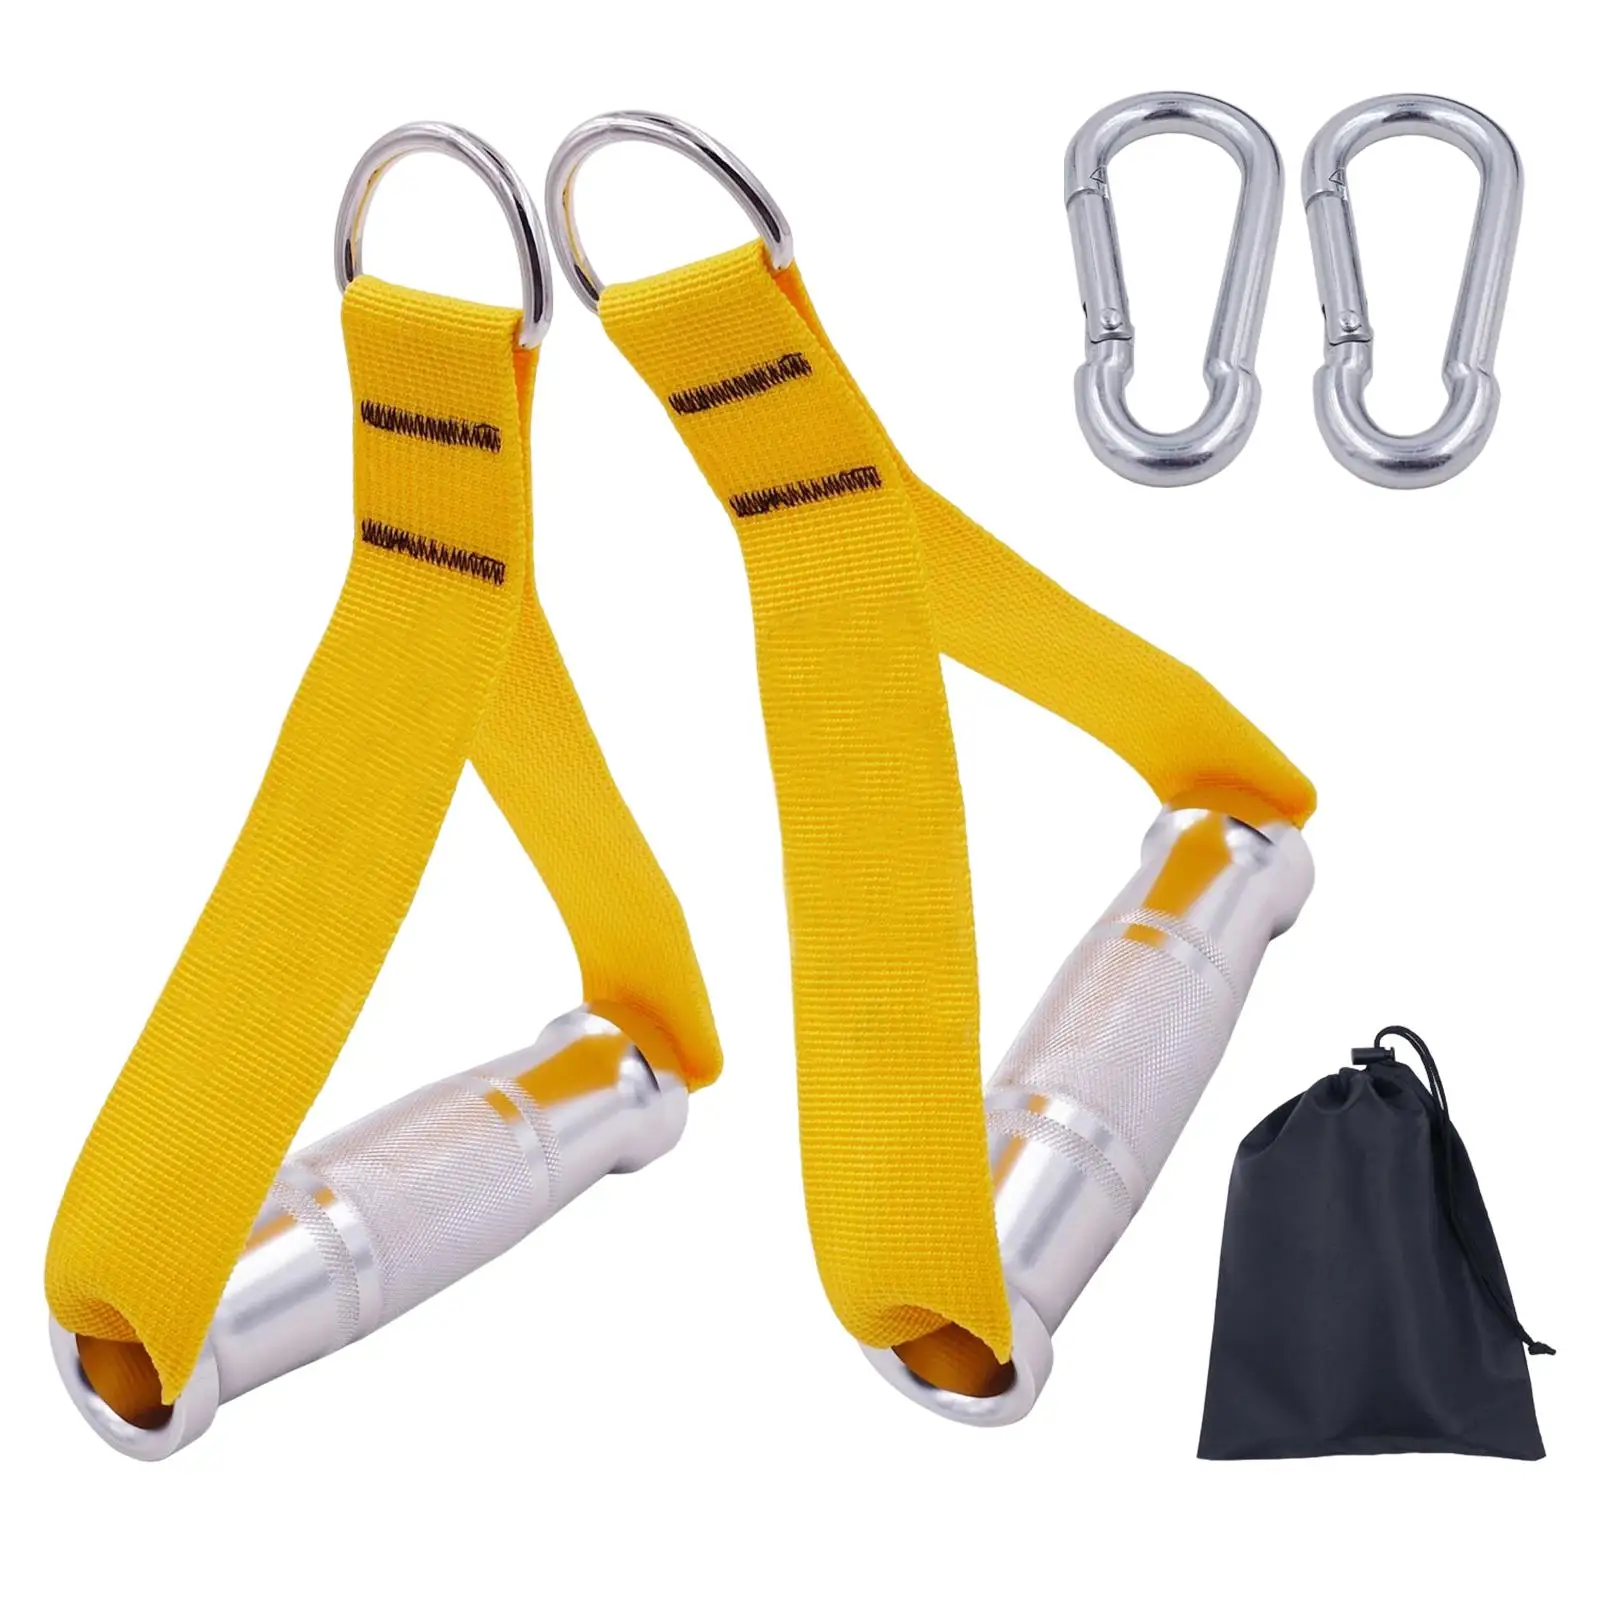 Strong Resistance Bands Nylon Handle Webbing for Fitness Equipment Metal Grips